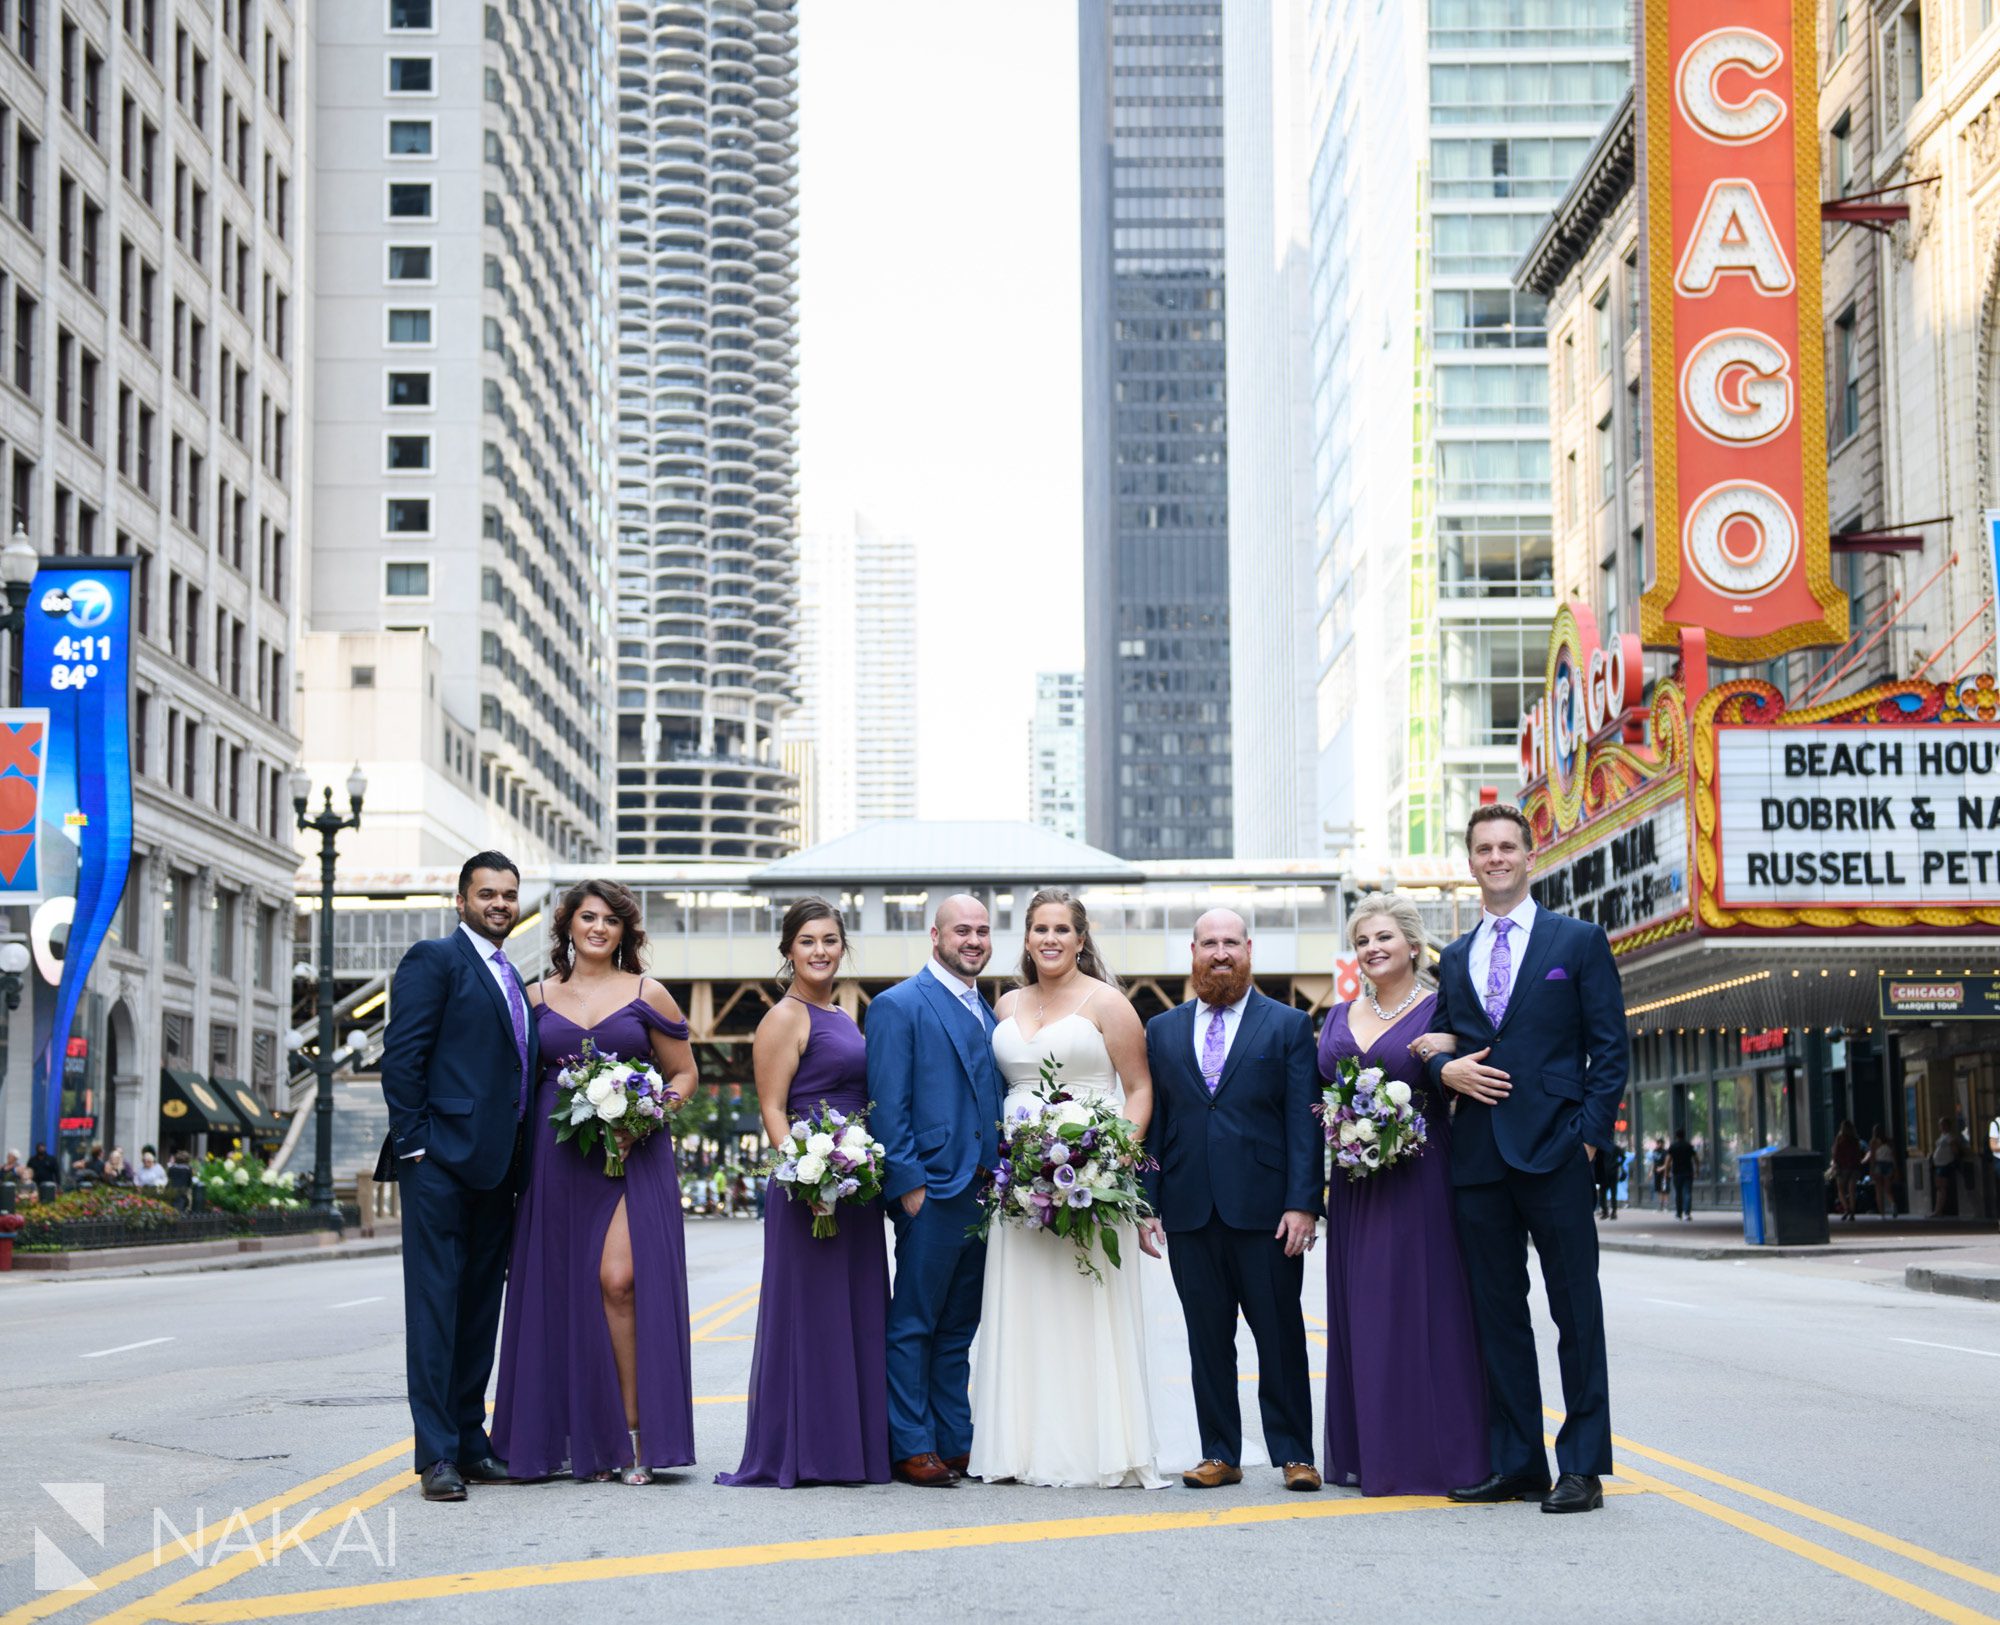 Chicago theatre sign wedding photographer bridal party